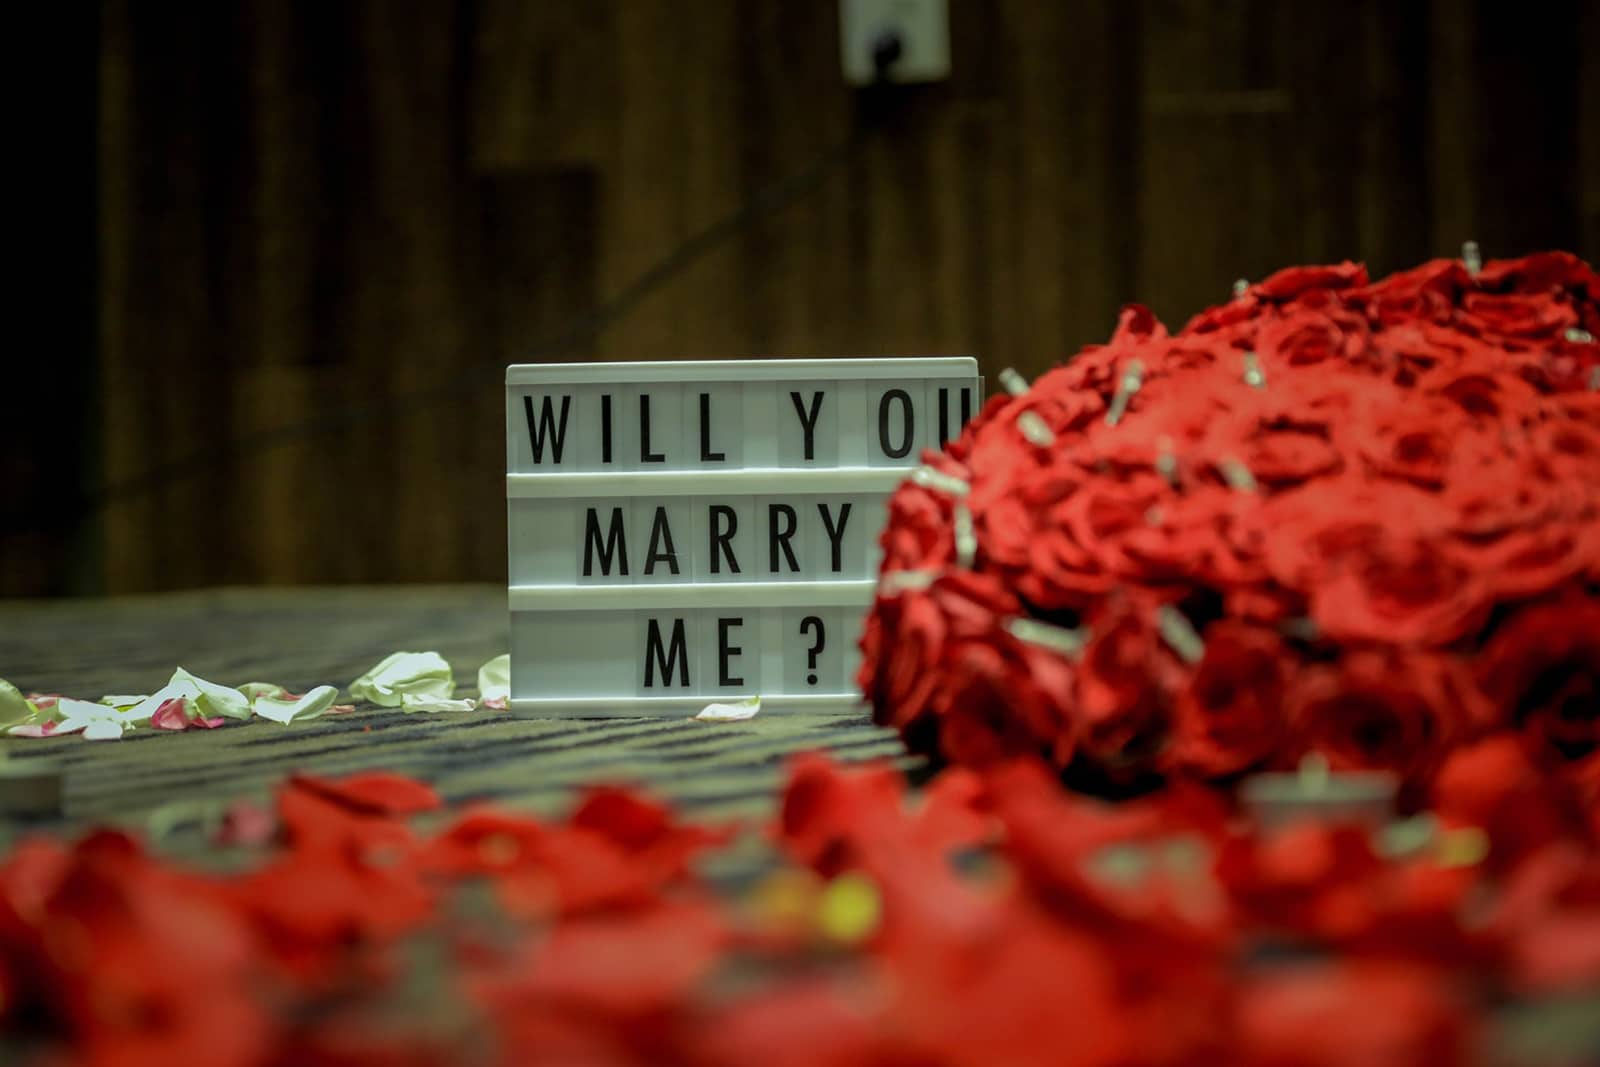 Should I say "please marry me", "would you marry me" or "will you be my wife" when proposing?